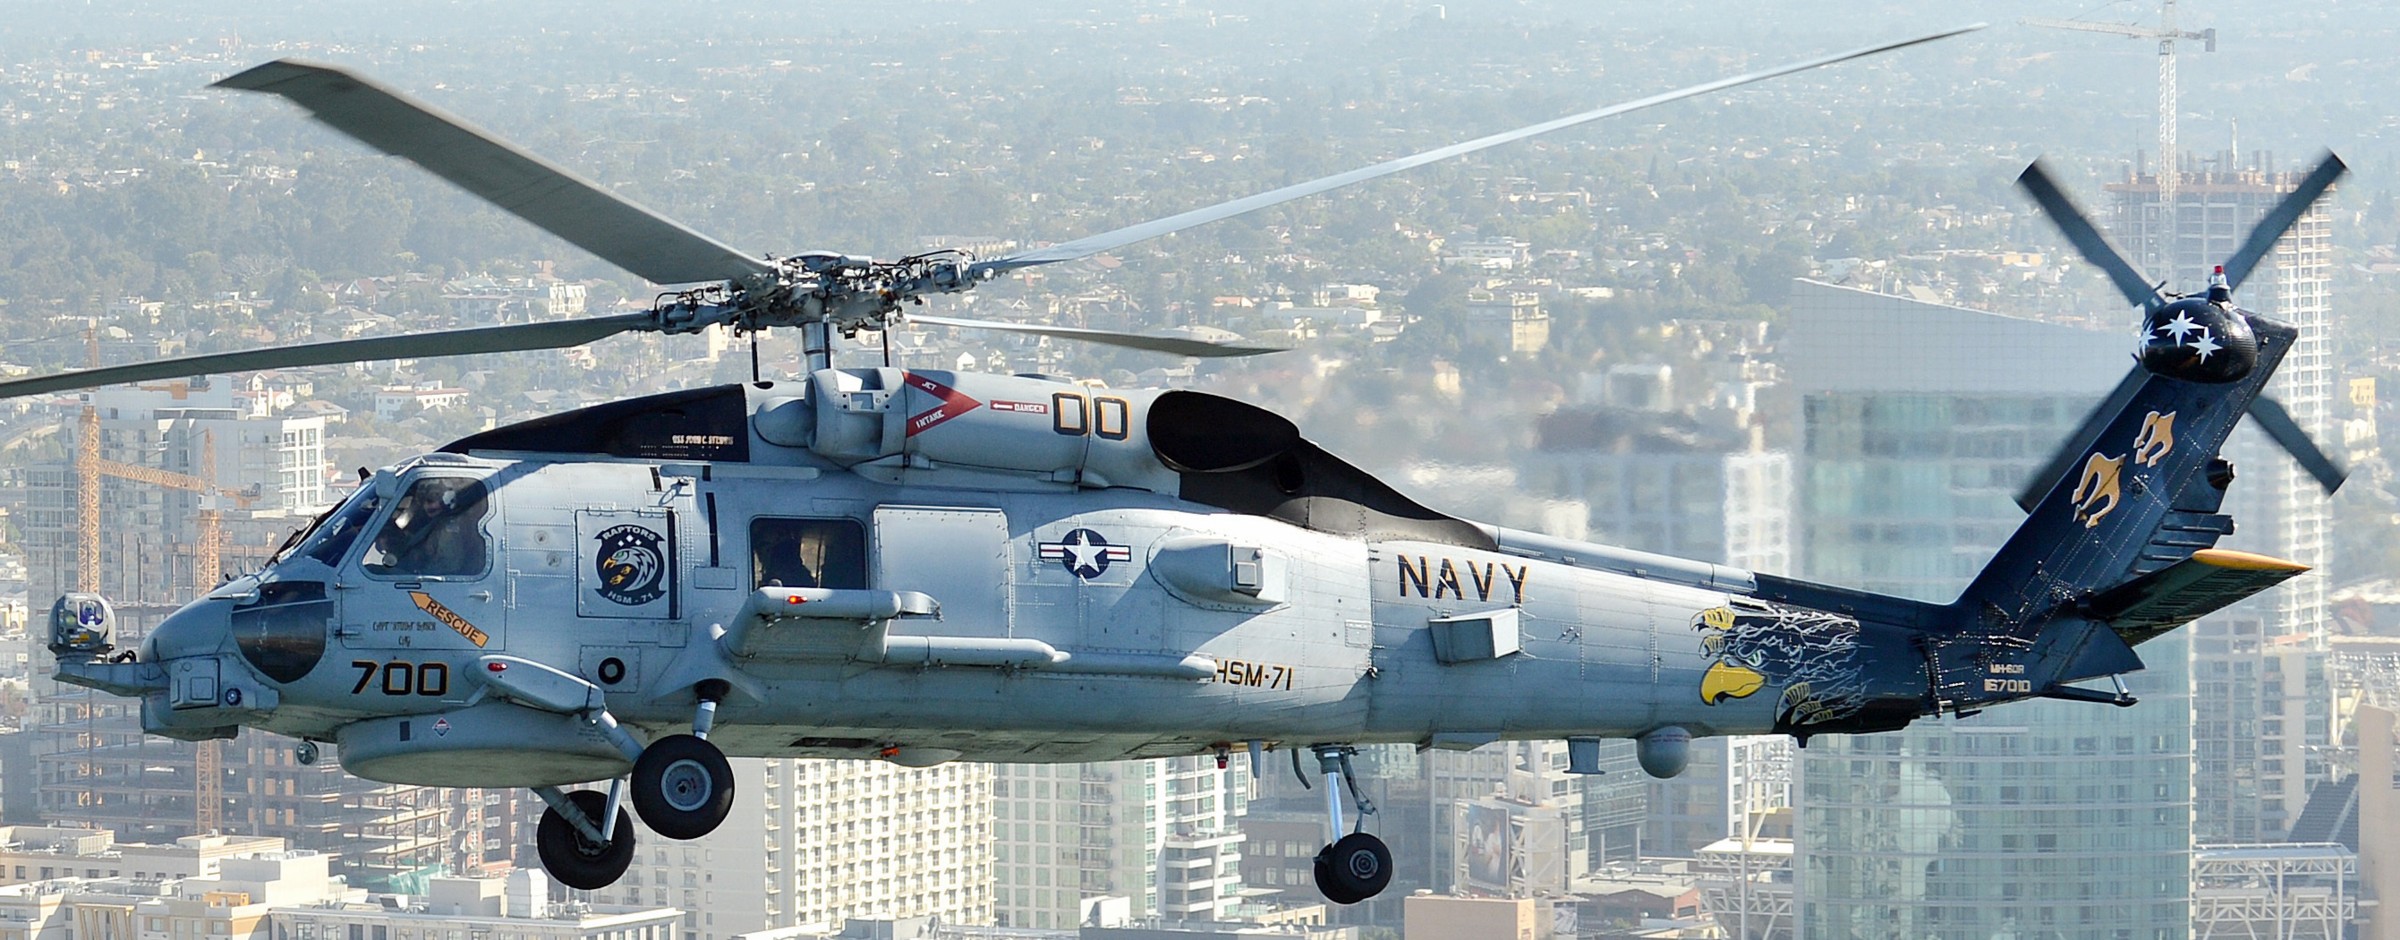 hsm-71 raptors helicopter maritime strike squadron mh-60r seahawk navy 2014 64